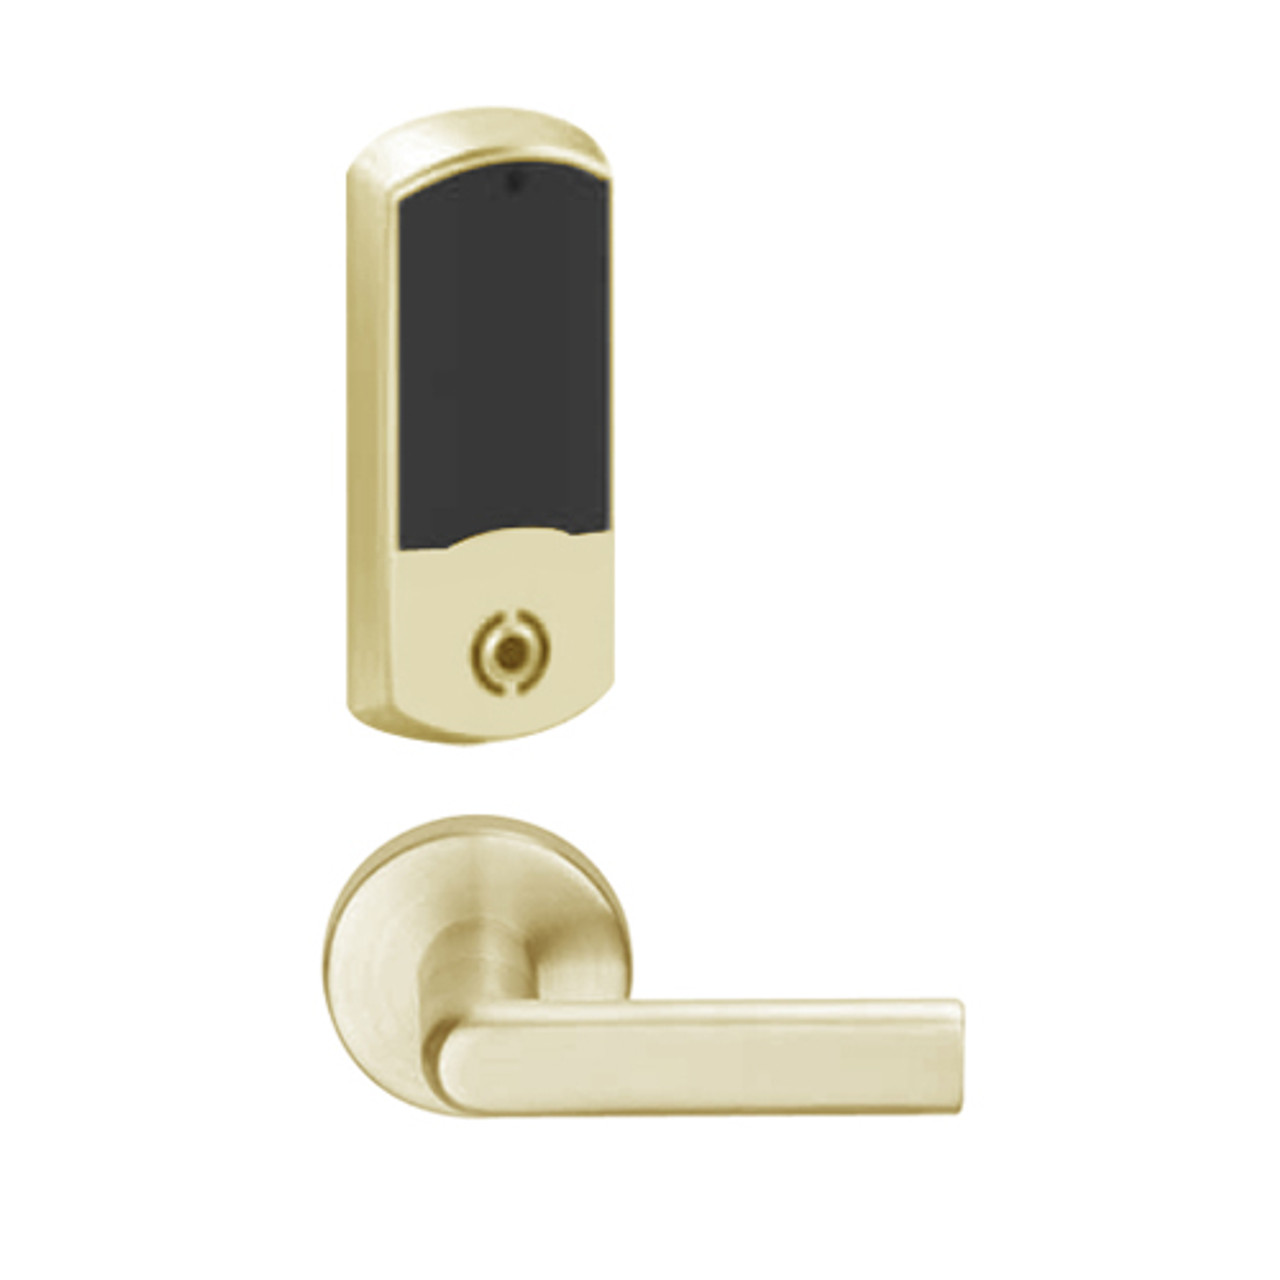 LEMS-GRW-J-01-606-00C Schlage Storeroom Wireless Greenwich Mortise Lock with LED Indicator and 01 Lever Prepped for FSIC in Satin Brass